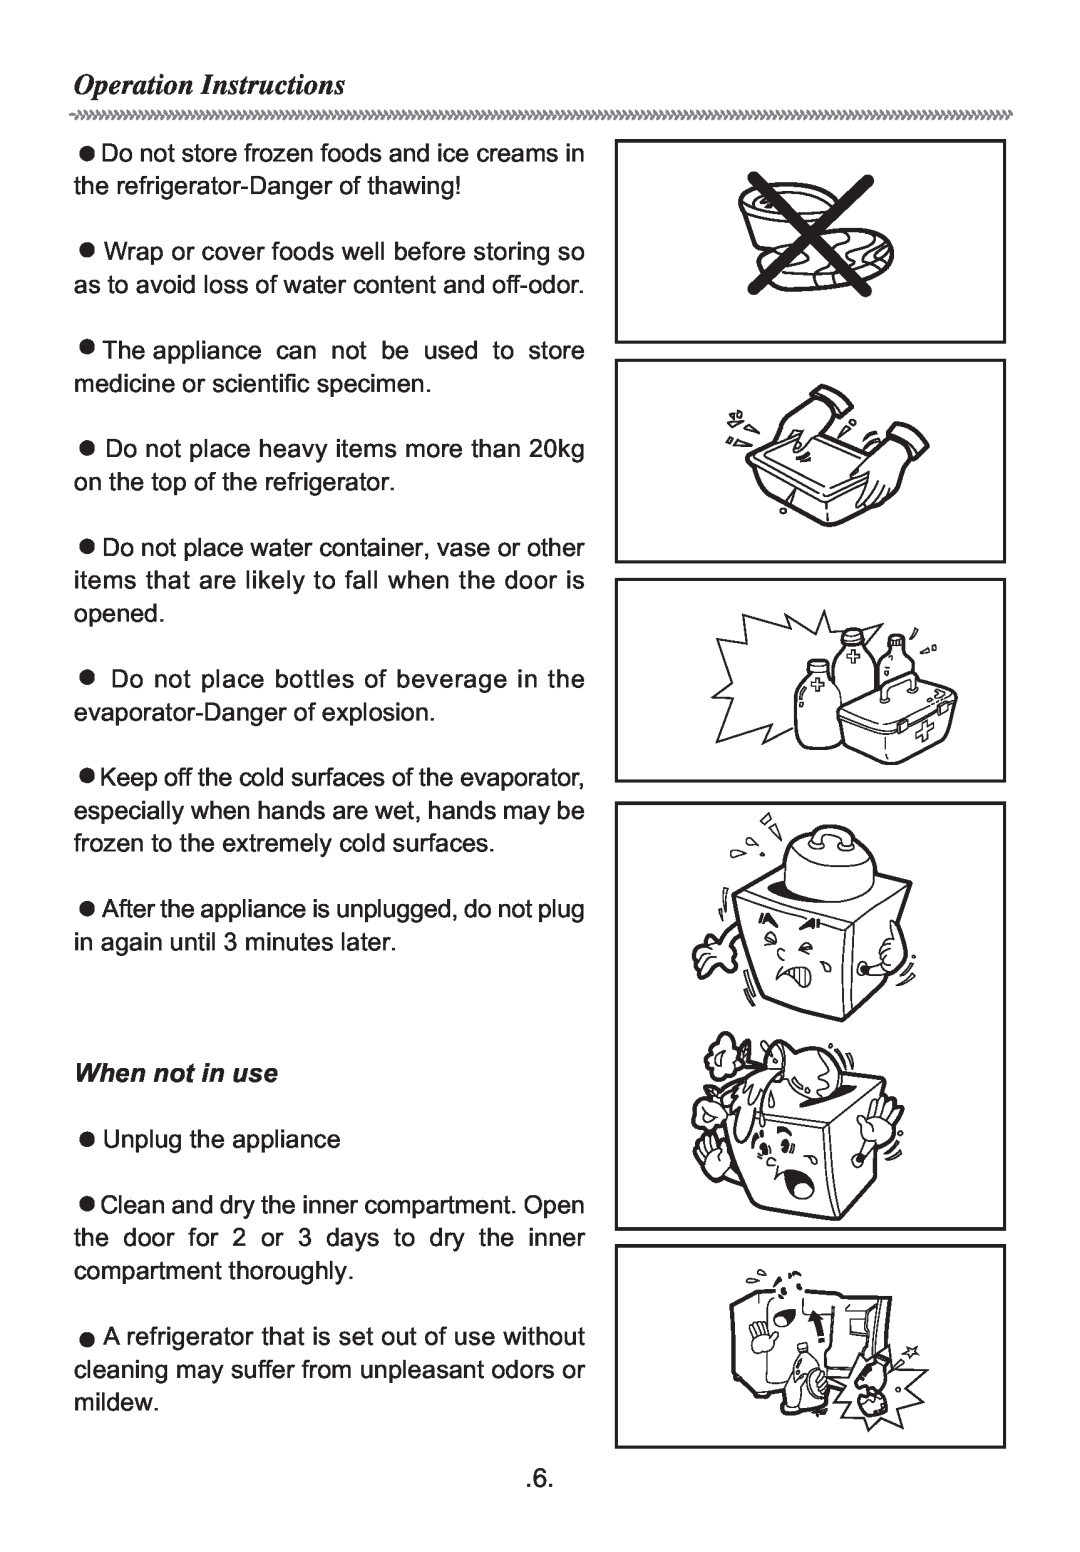 Haier HR-62 manual Operation Instructions, When not in use 